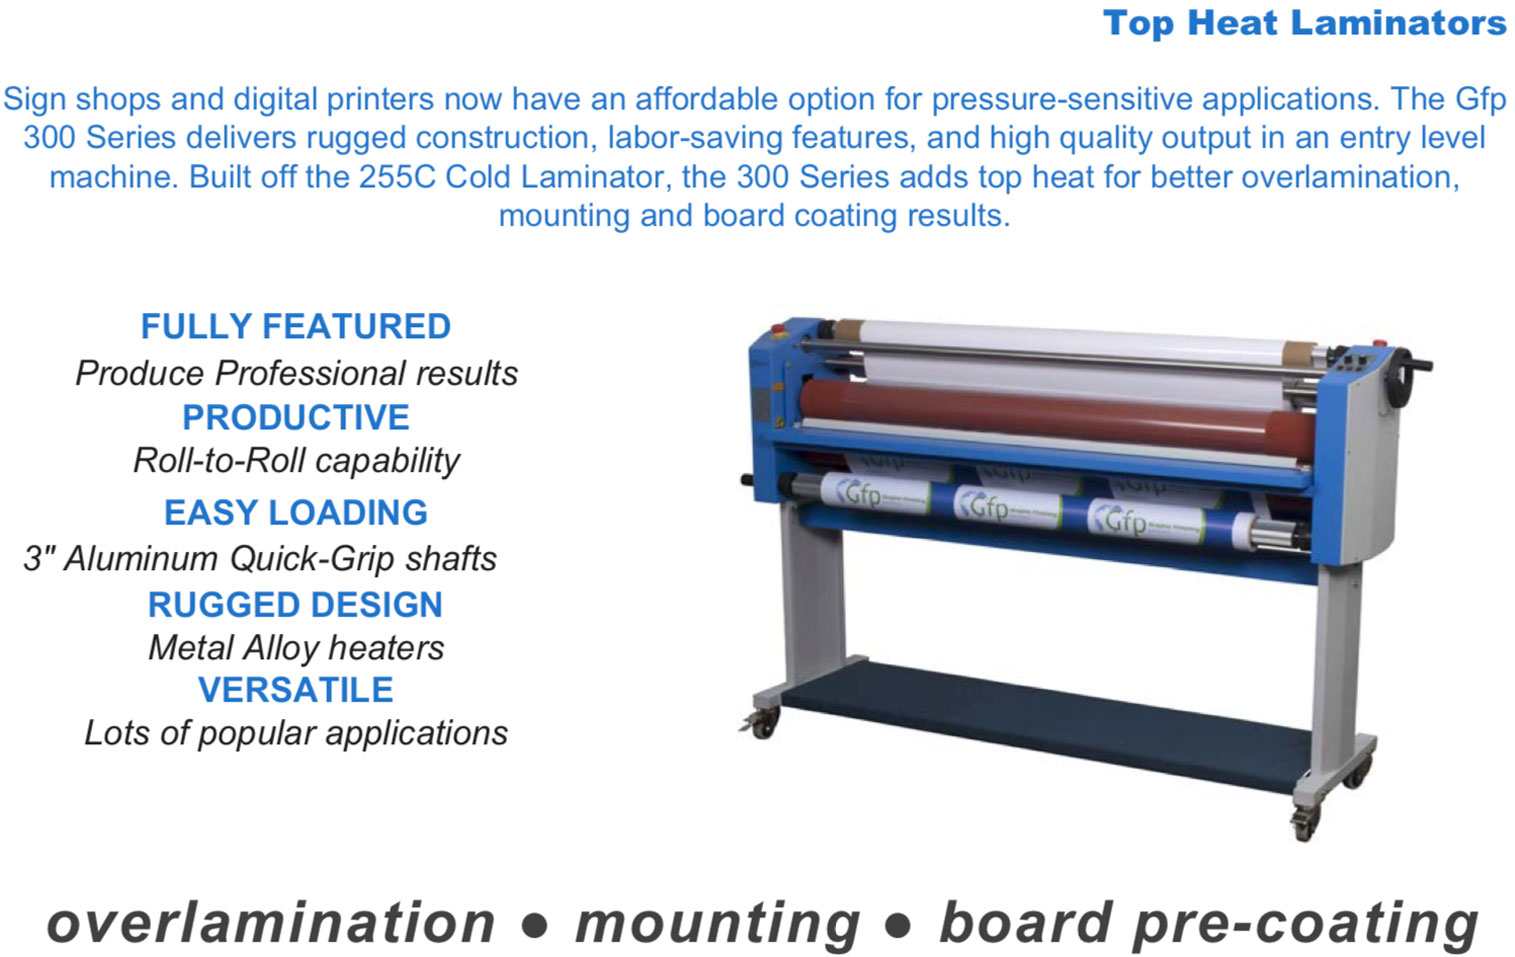 gfp 363-th top heat laminator showing for overlamination mounting and board pre-coating with 3